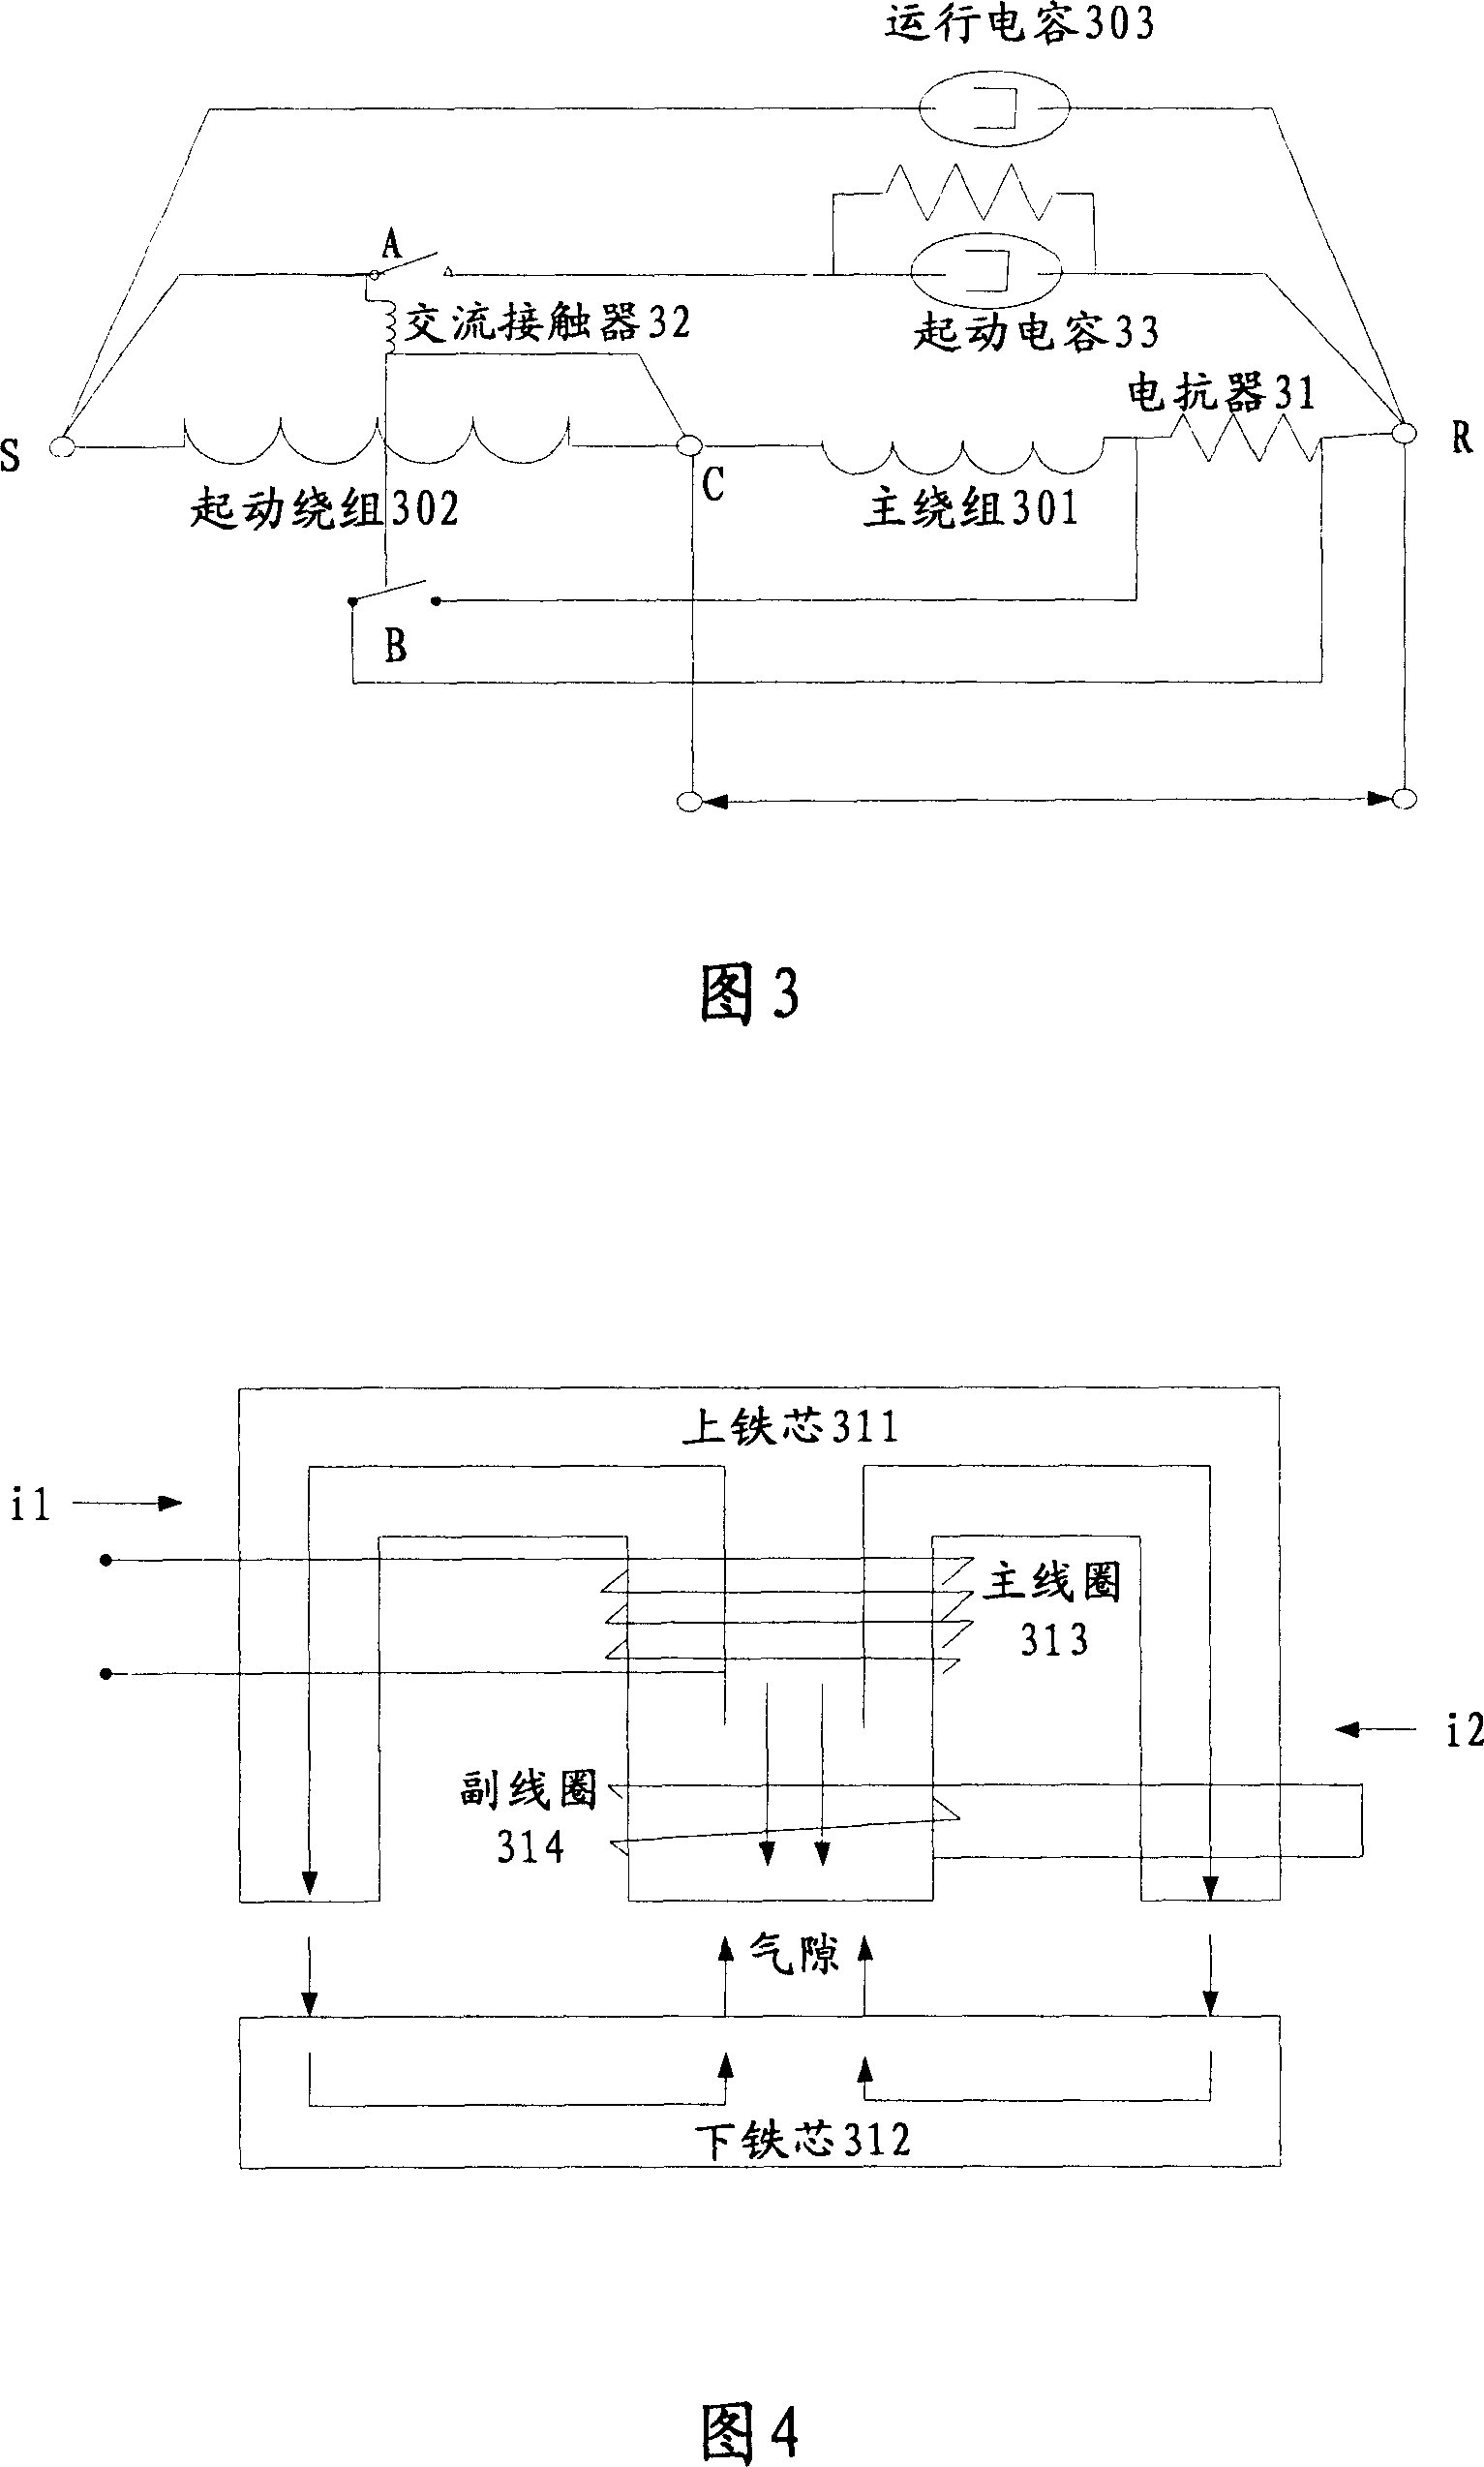 A soft starter for single-phase motor and single-phase motor with same